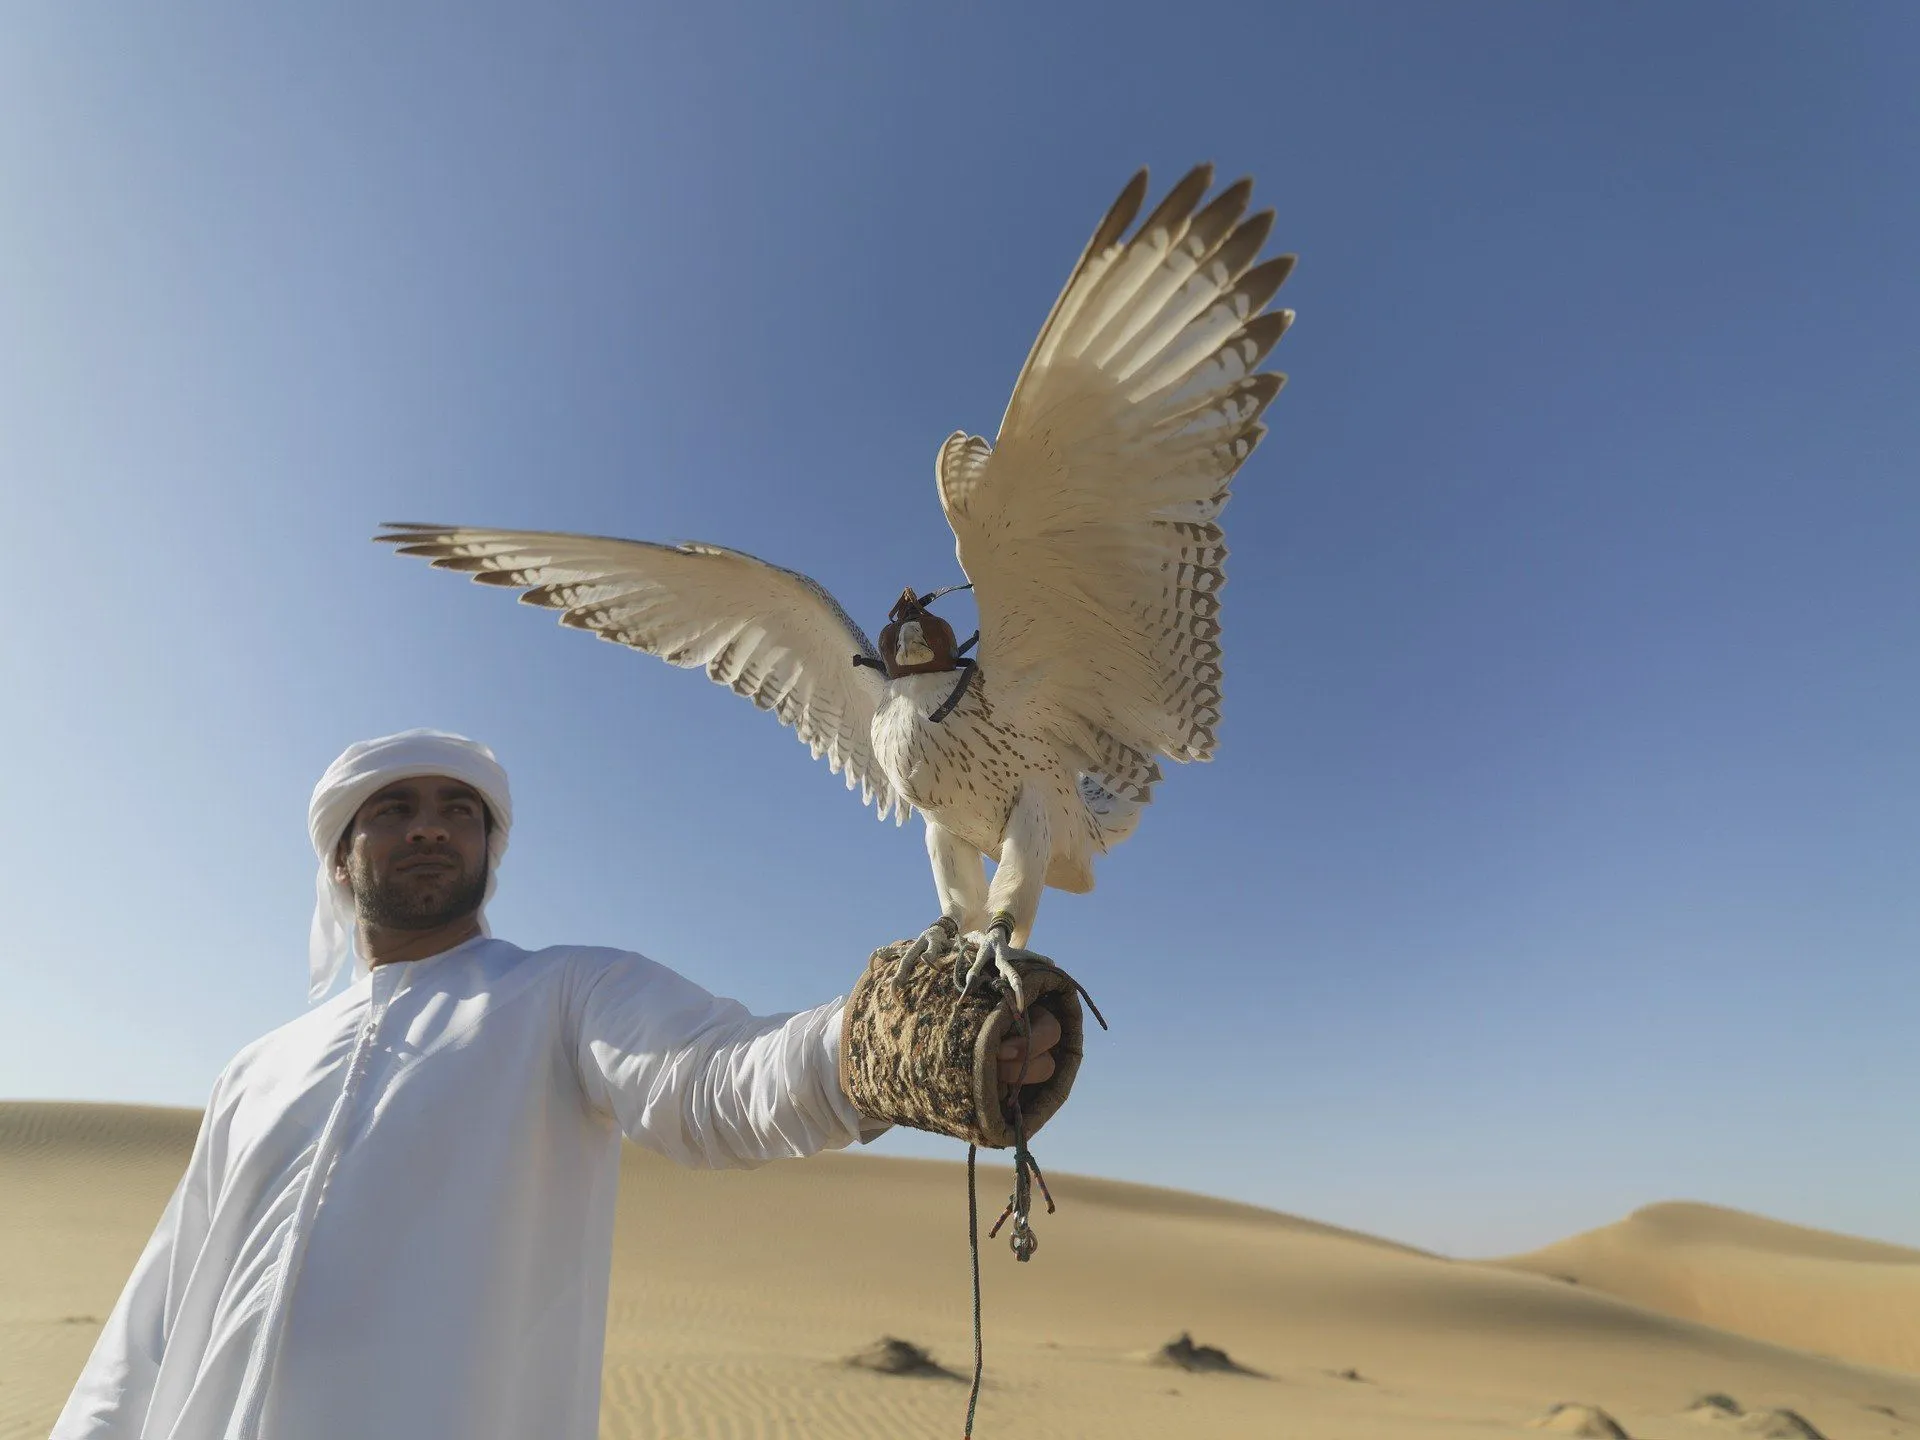 Arabian Desert facts are extremely interesting for students.